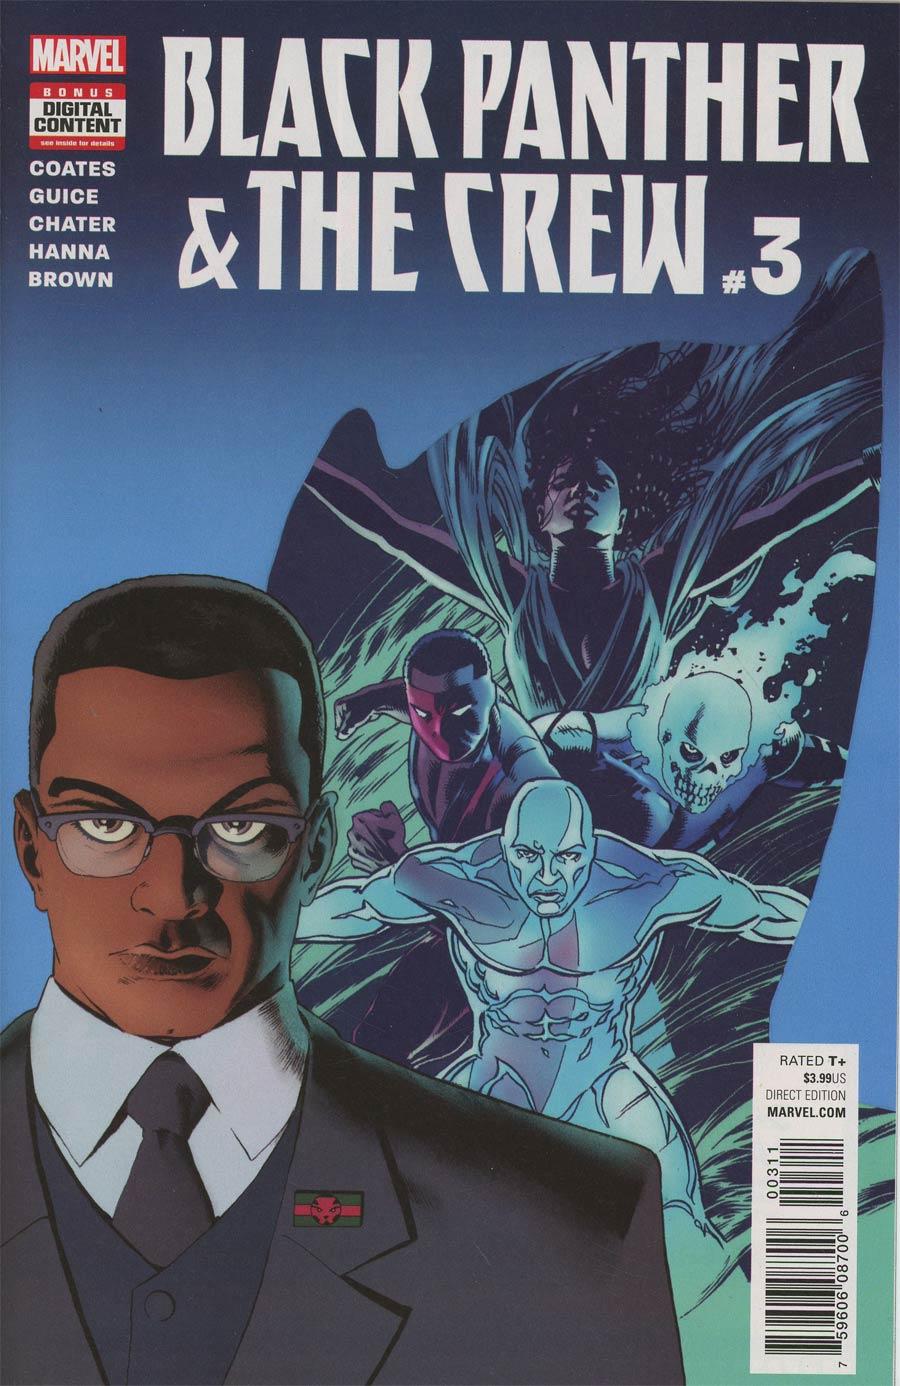 Black Panther And The Crew Vol. 1 #3